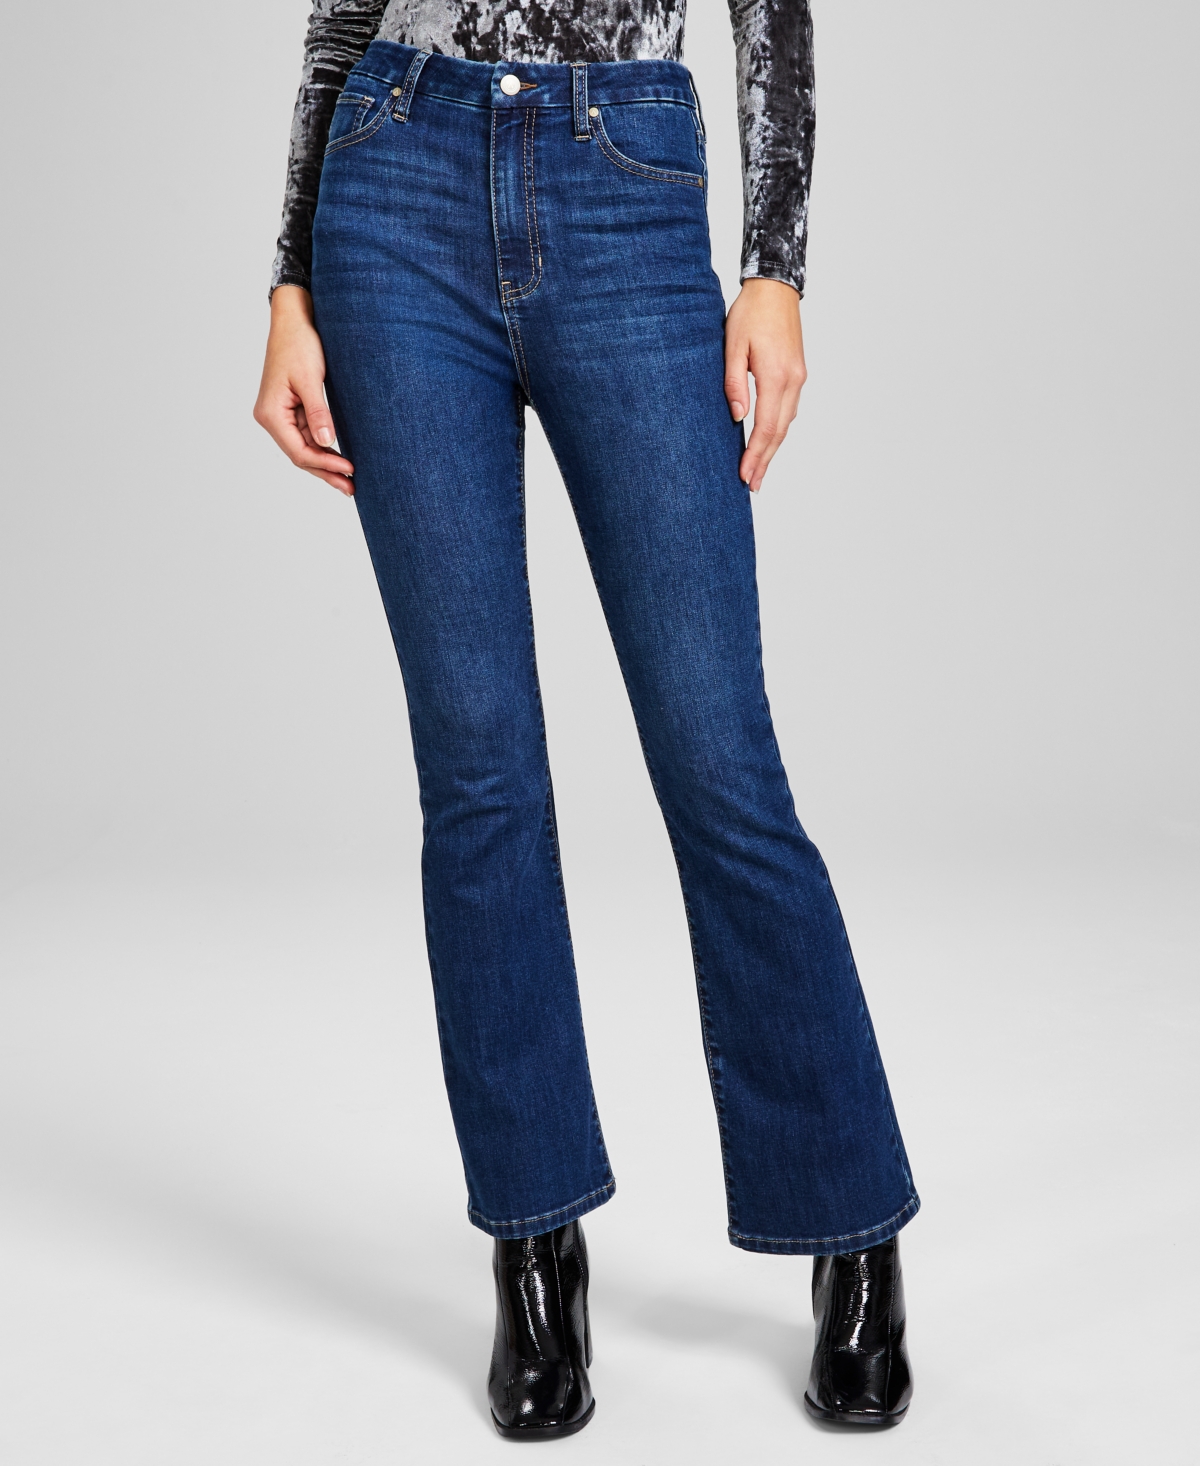 Women's High Rise Bootcut Jeans, Created for Macy's - Dark Wash